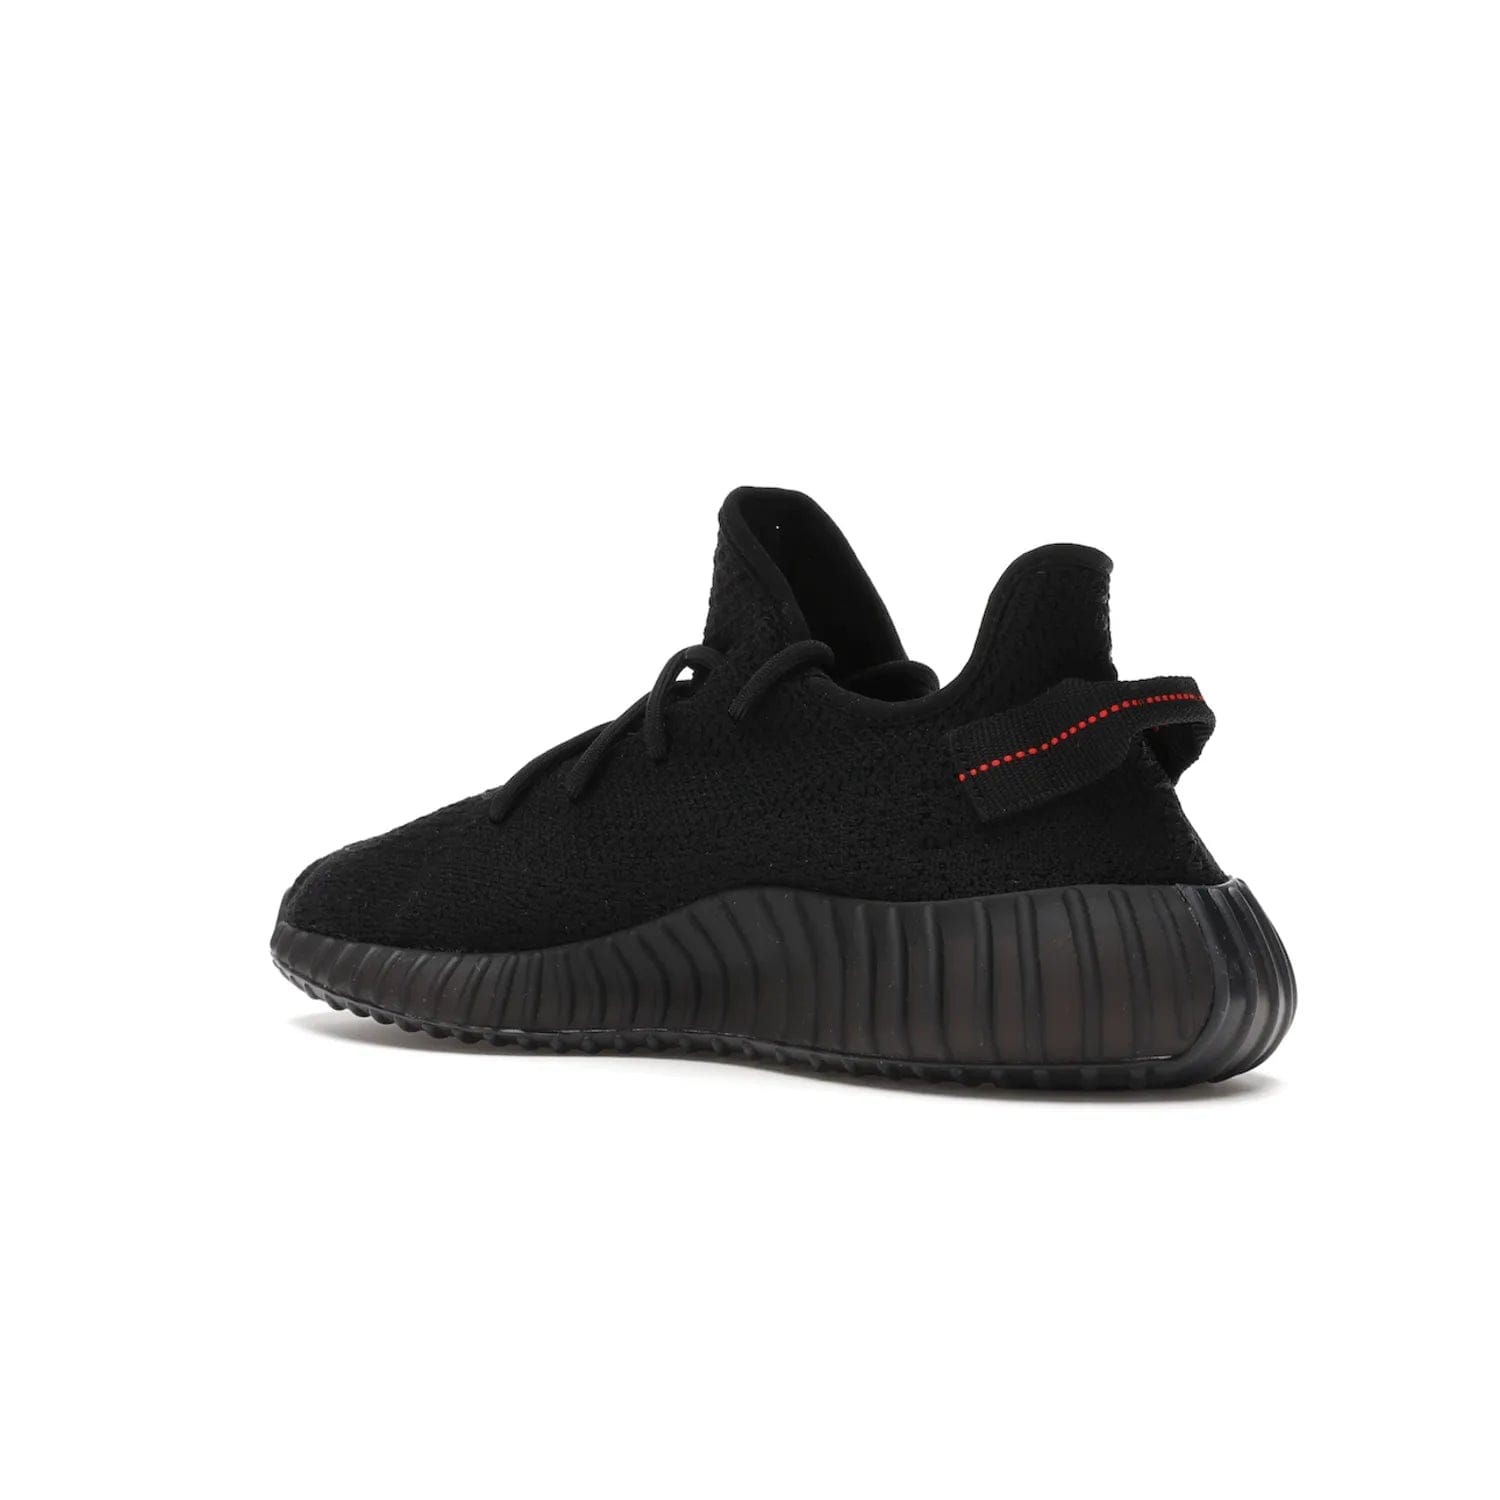 adidas Yeezy Boost 350 V2 Black Red (2017/2020) - Image 23 - Only at www.BallersClubKickz.com - Adidas Yeezy Boost 350 V2 Black Red: a classic colorway featuring black Primeknit upper, BOOST cushioning system, and iconic "SPLY-350" text. Released in 2017 for a retail price of $220.